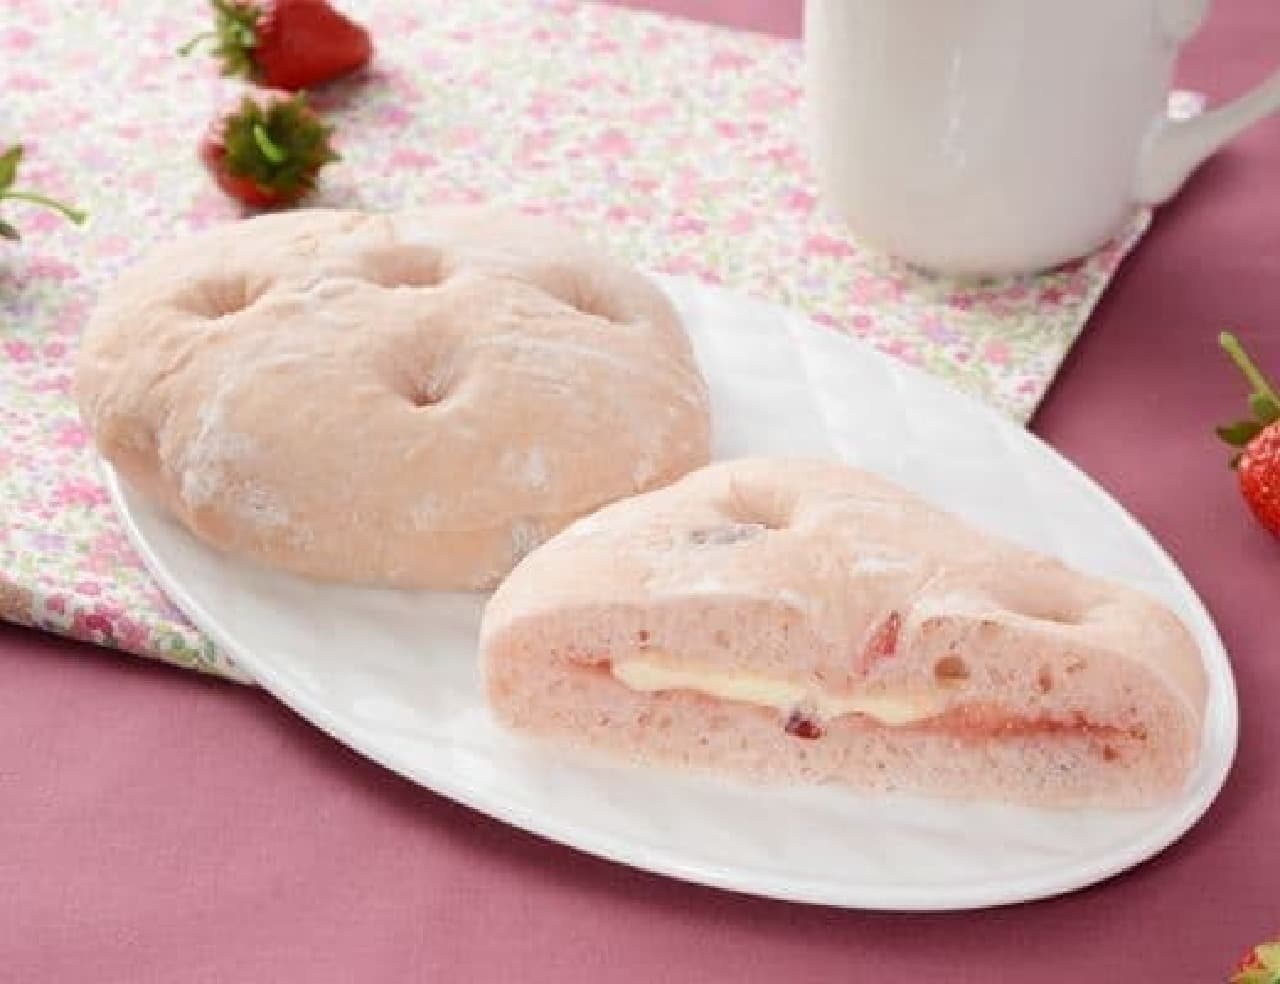 Lawson "Strawberry Focaccia Chasing Butter with Strawberry Butter"